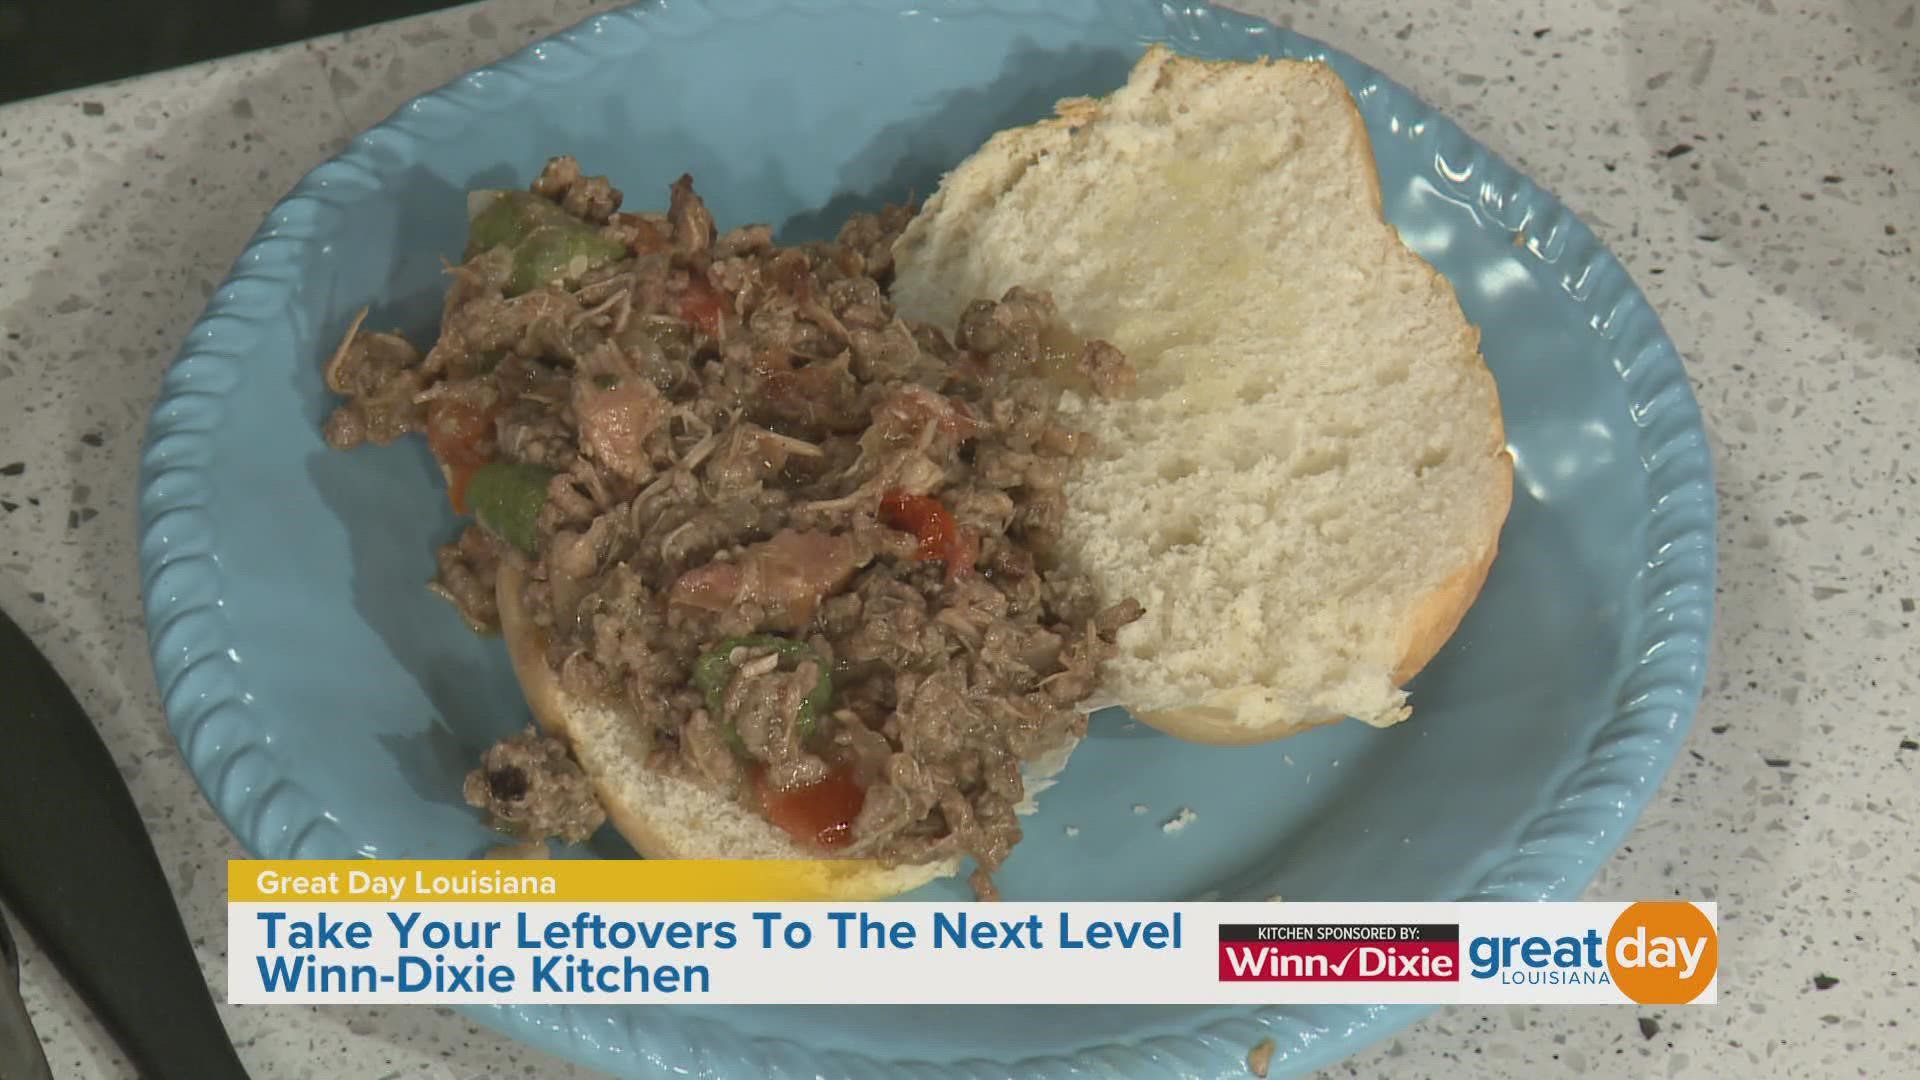 "Lagniappe Leftovers" helps you save money by reusing your leftovers in a new way.